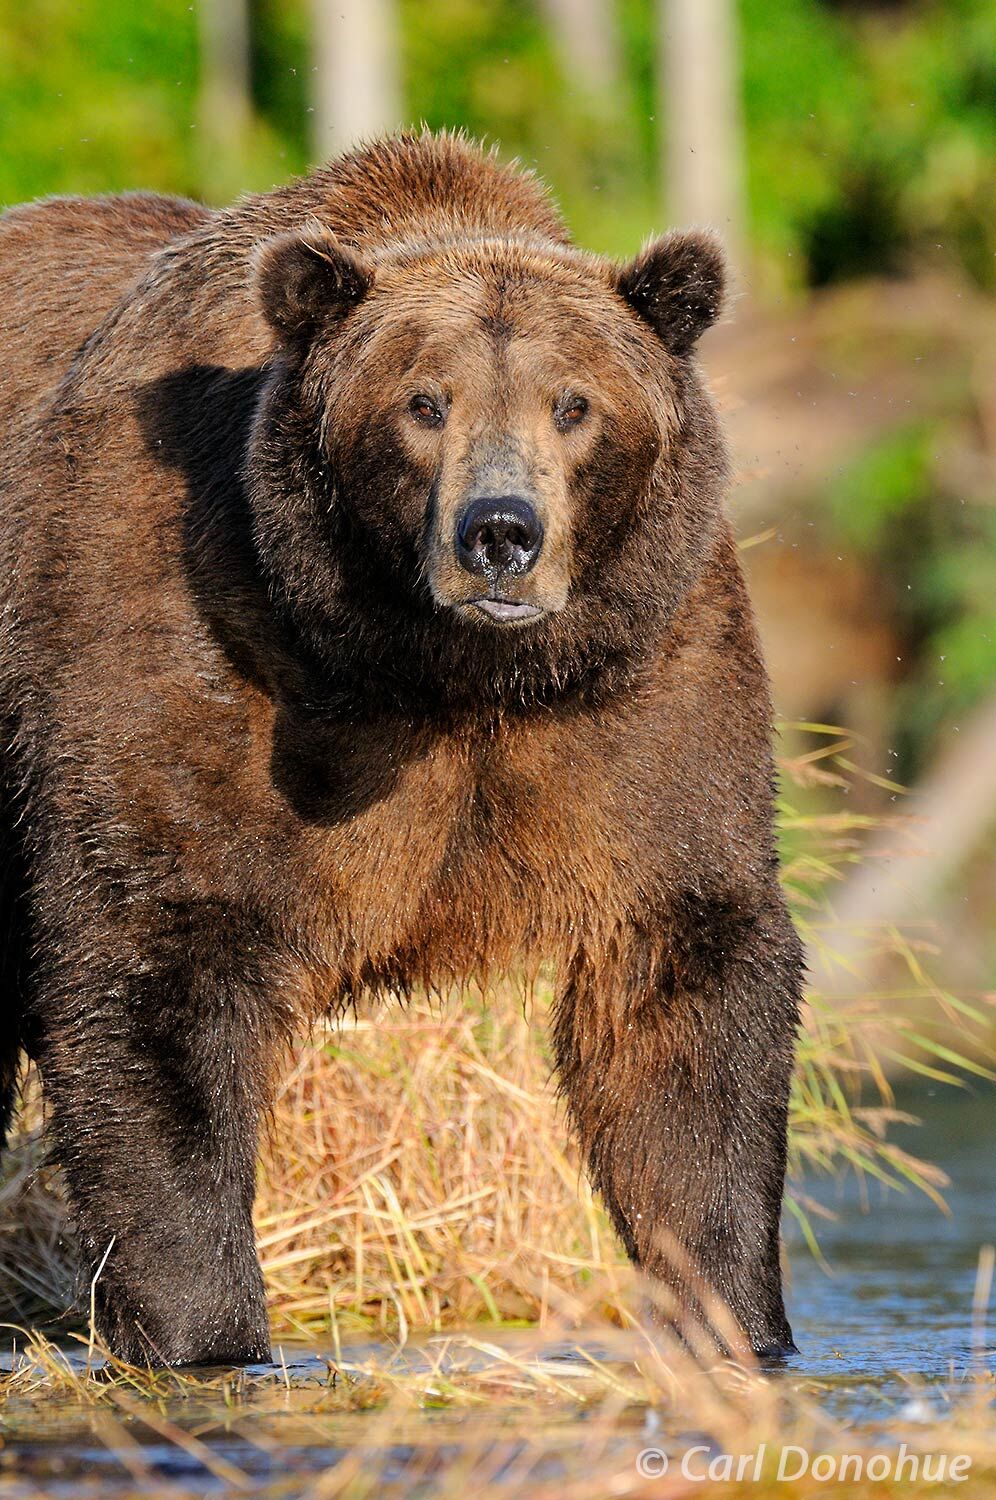 Ursus arctos. The Grizzly Bear, Brown Bear. The Great Bear. Bear Who Walks Like a Man.  A large male adult brown bear, or grizzly...